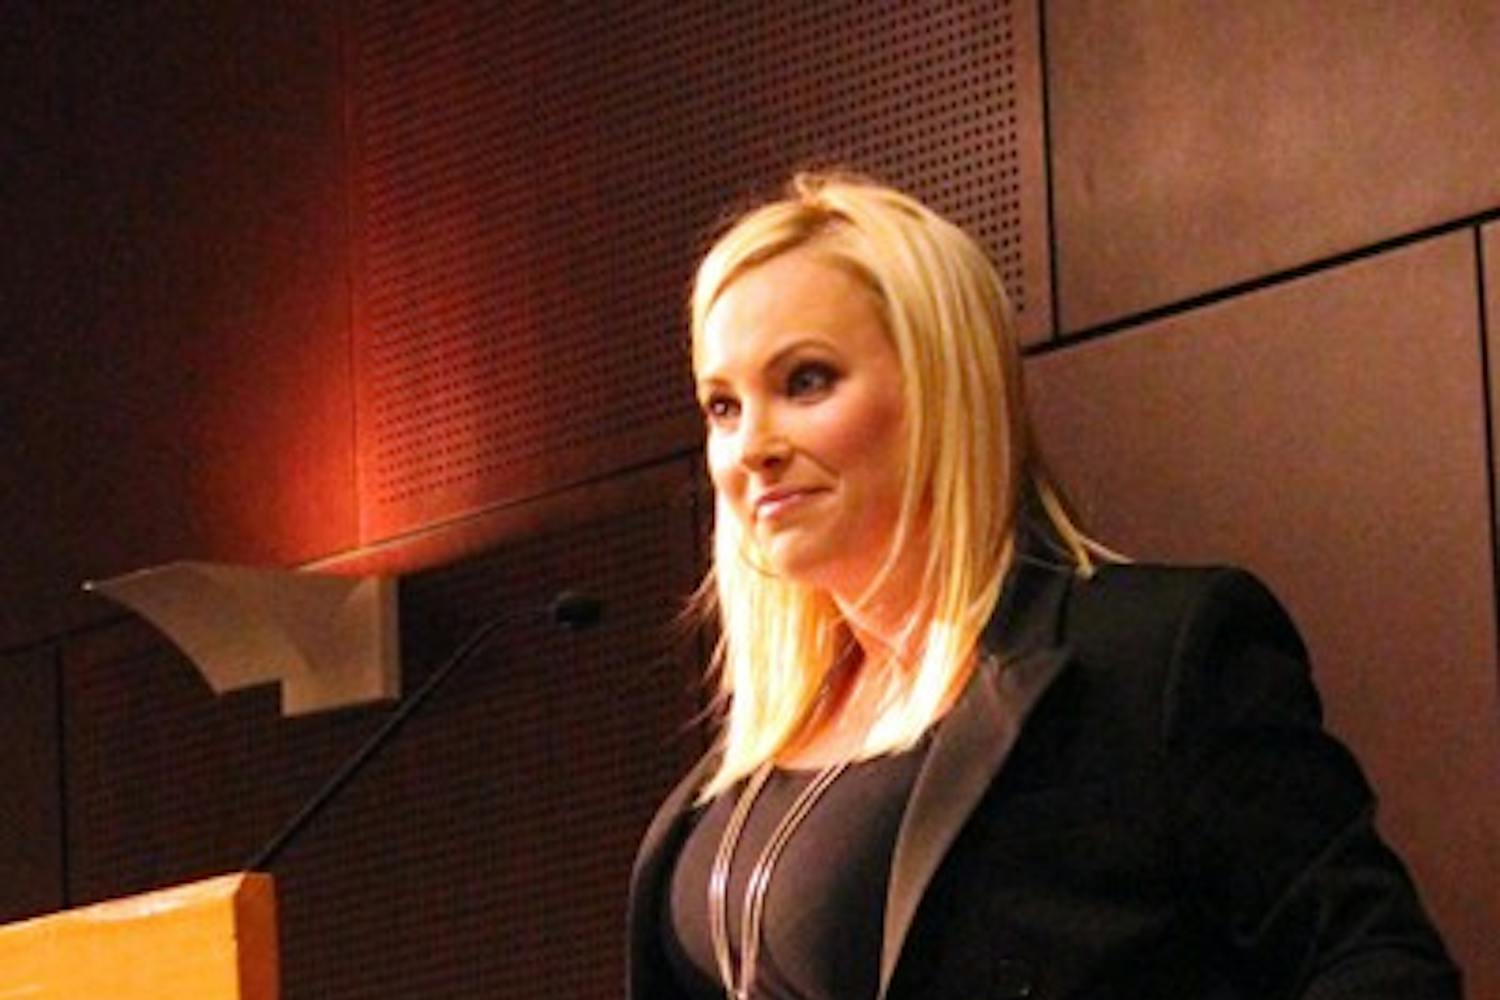 Meghan McCain speaks about her life experience as the daughter of a politician and presidential candidate in the Memorial Union on the Tempe campus Wednesday night. (Photo by Jenn Allen)